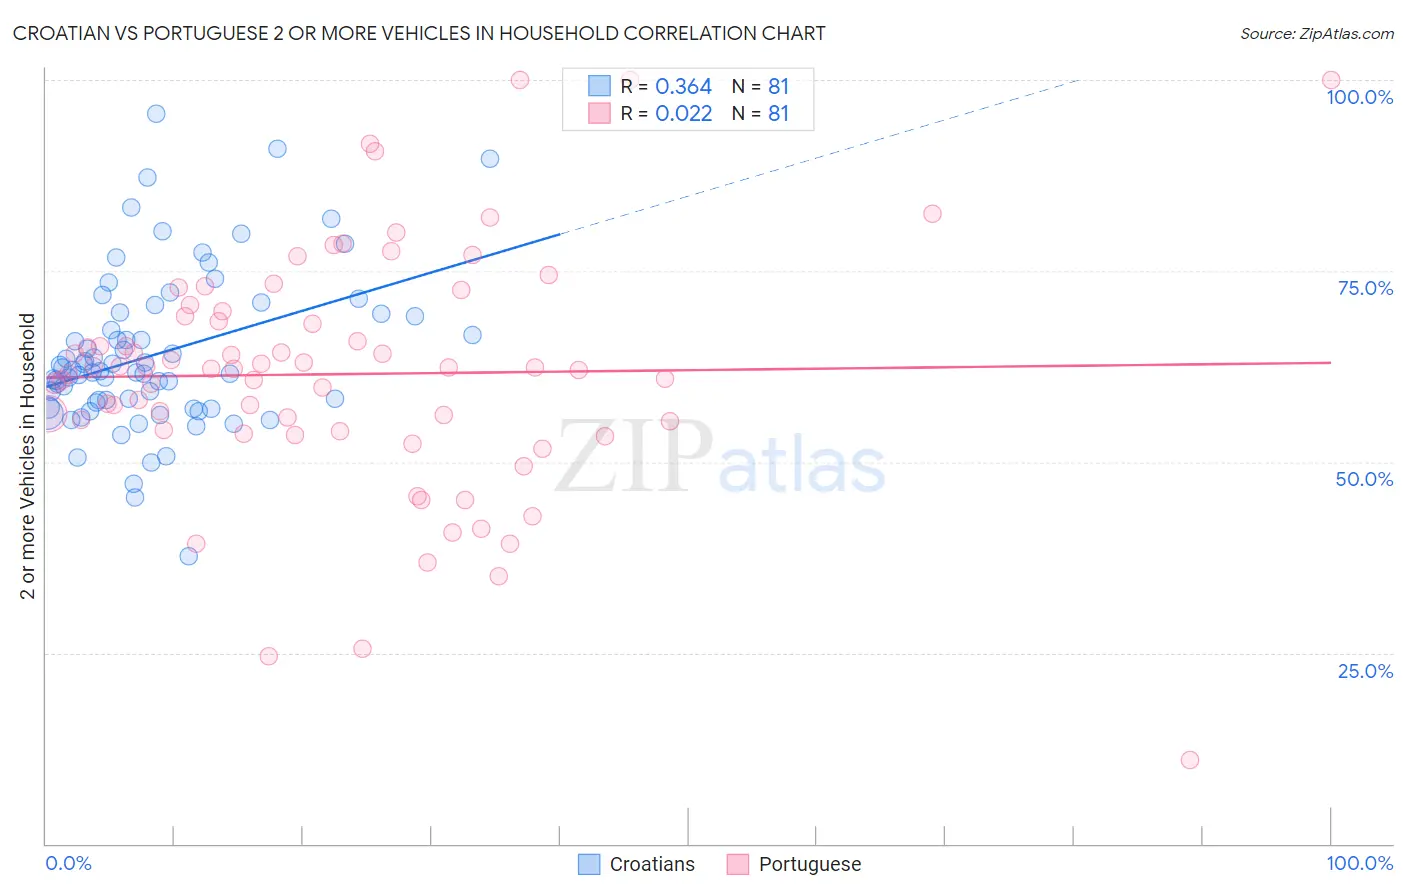 Croatian vs Portuguese 2 or more Vehicles in Household